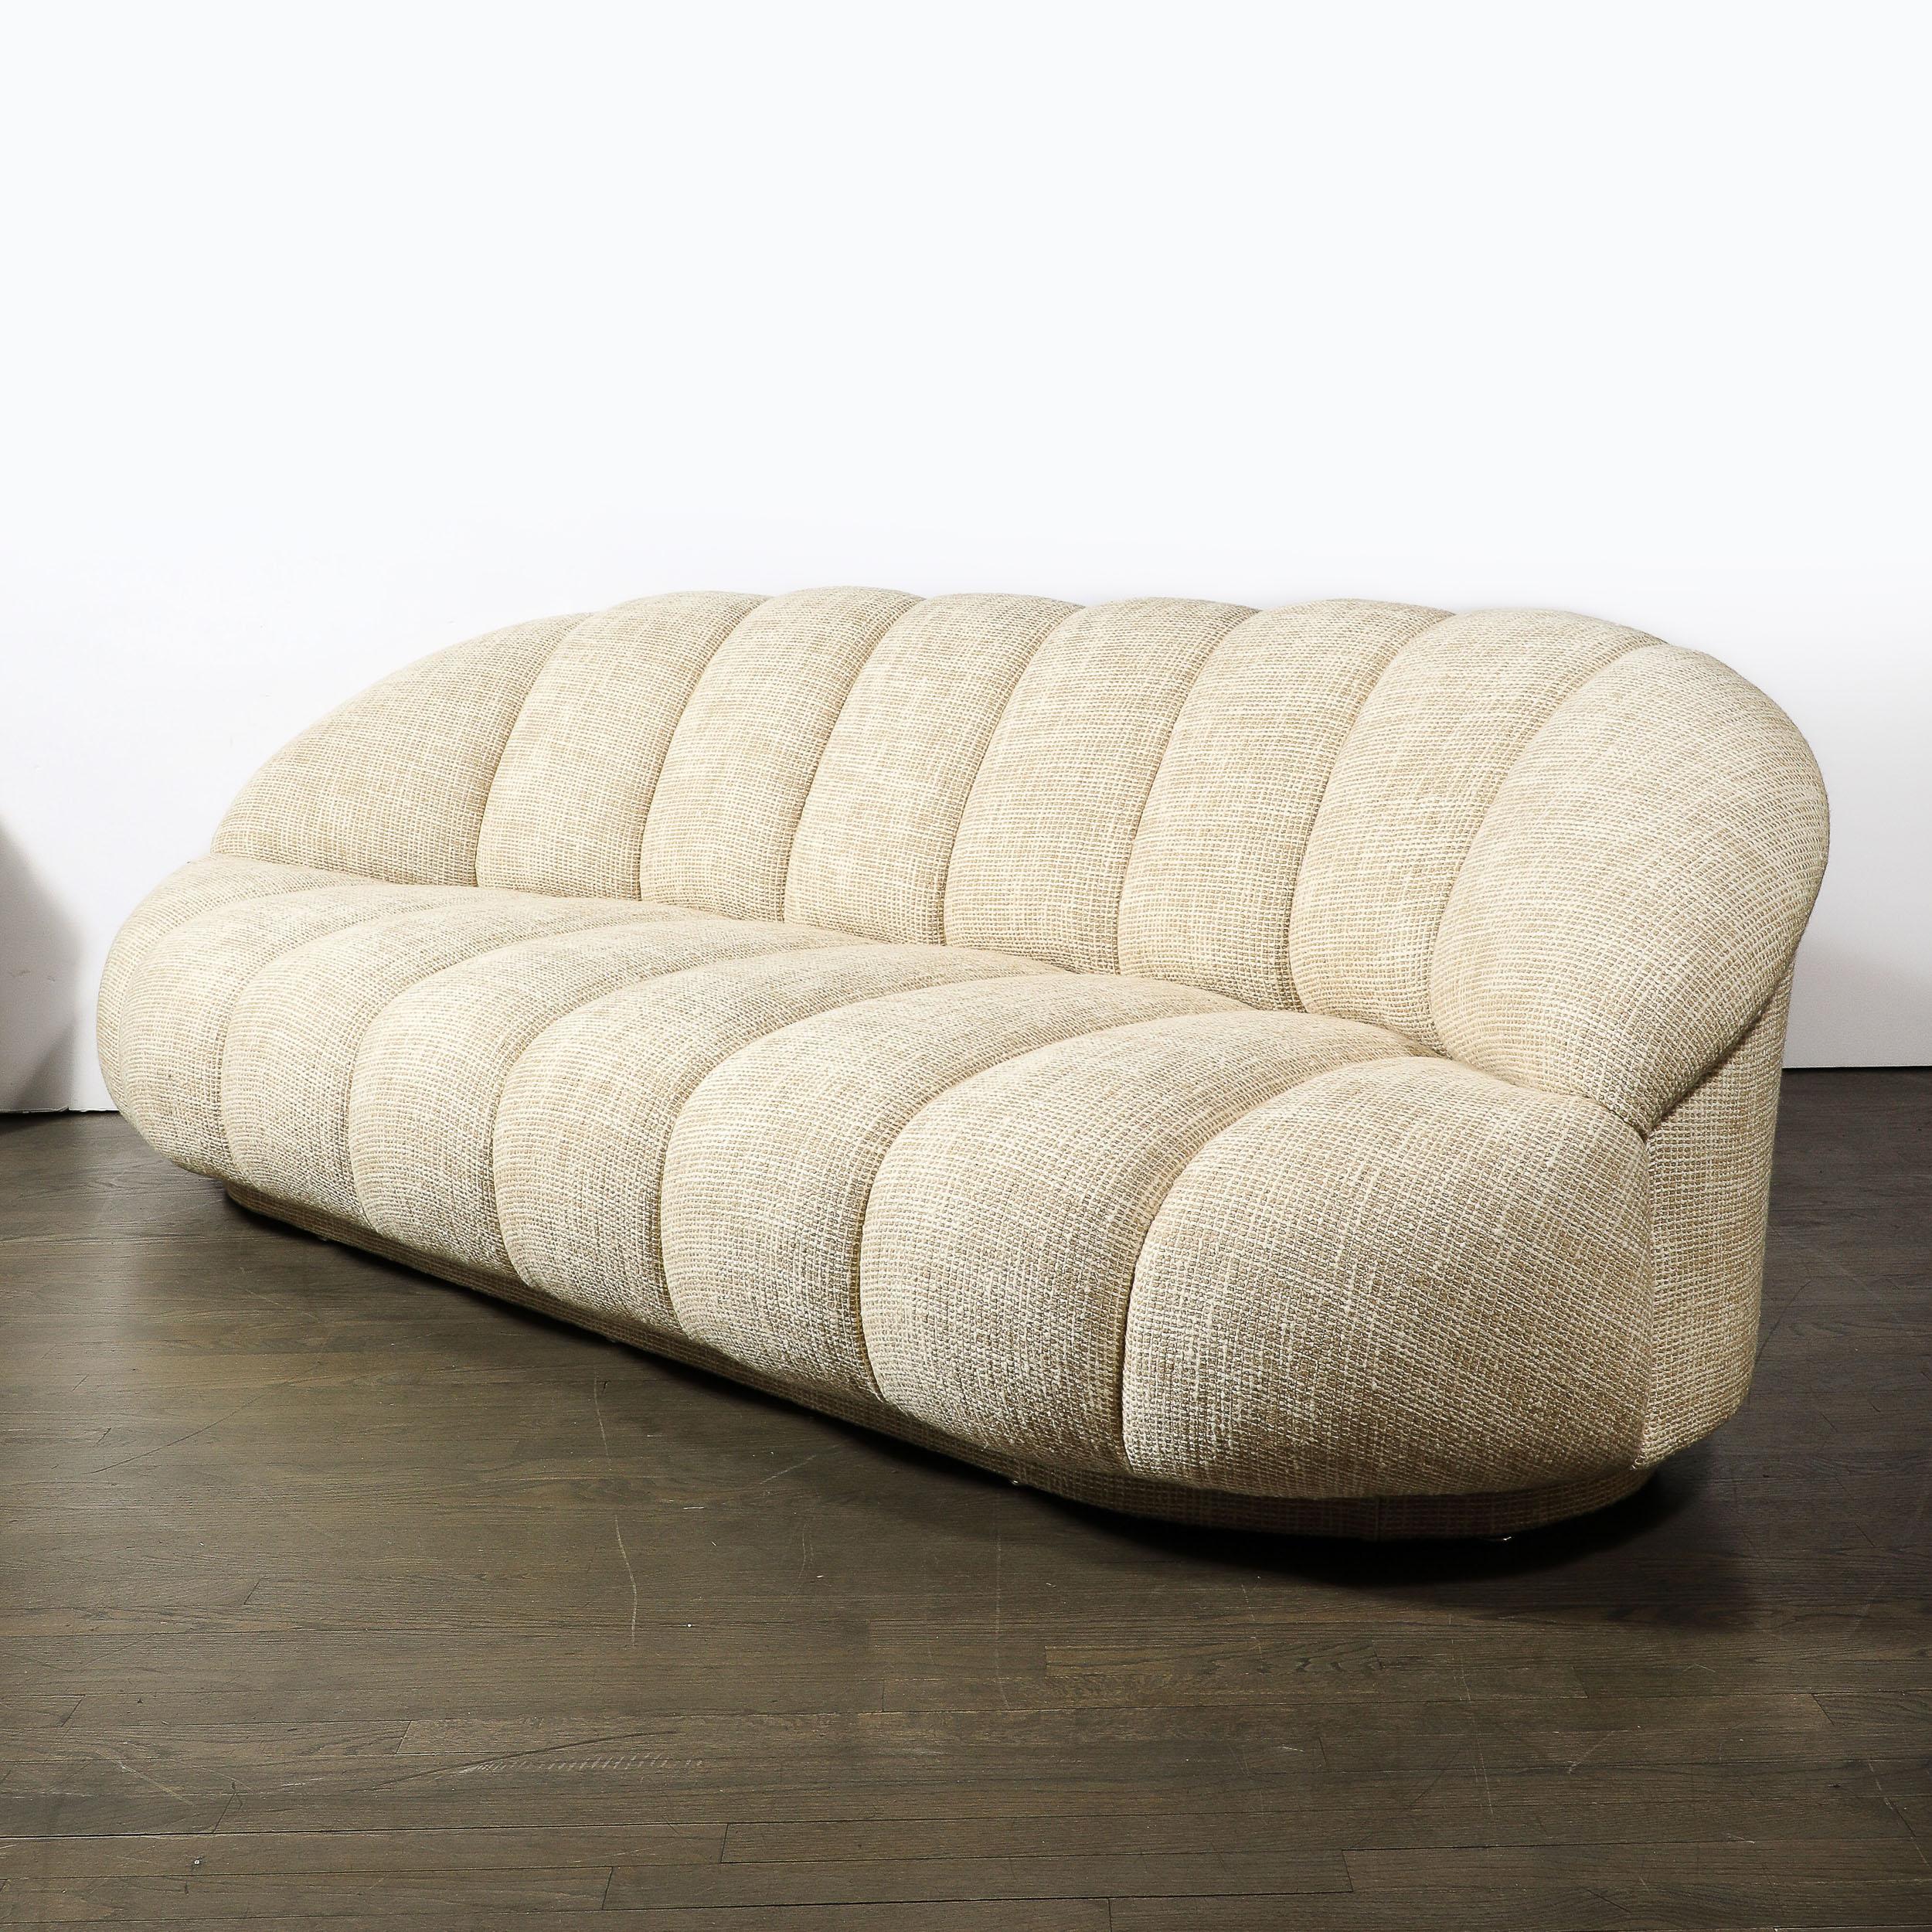 This sleek, playful, and beautifully proportioned Mid-Century Modernist Channel Form Cloud Sofa in Holly Hunt Fabric is by the esteemed furniture company A. Rudin and originates from the United States, Circa 1980. Features a rounded form with